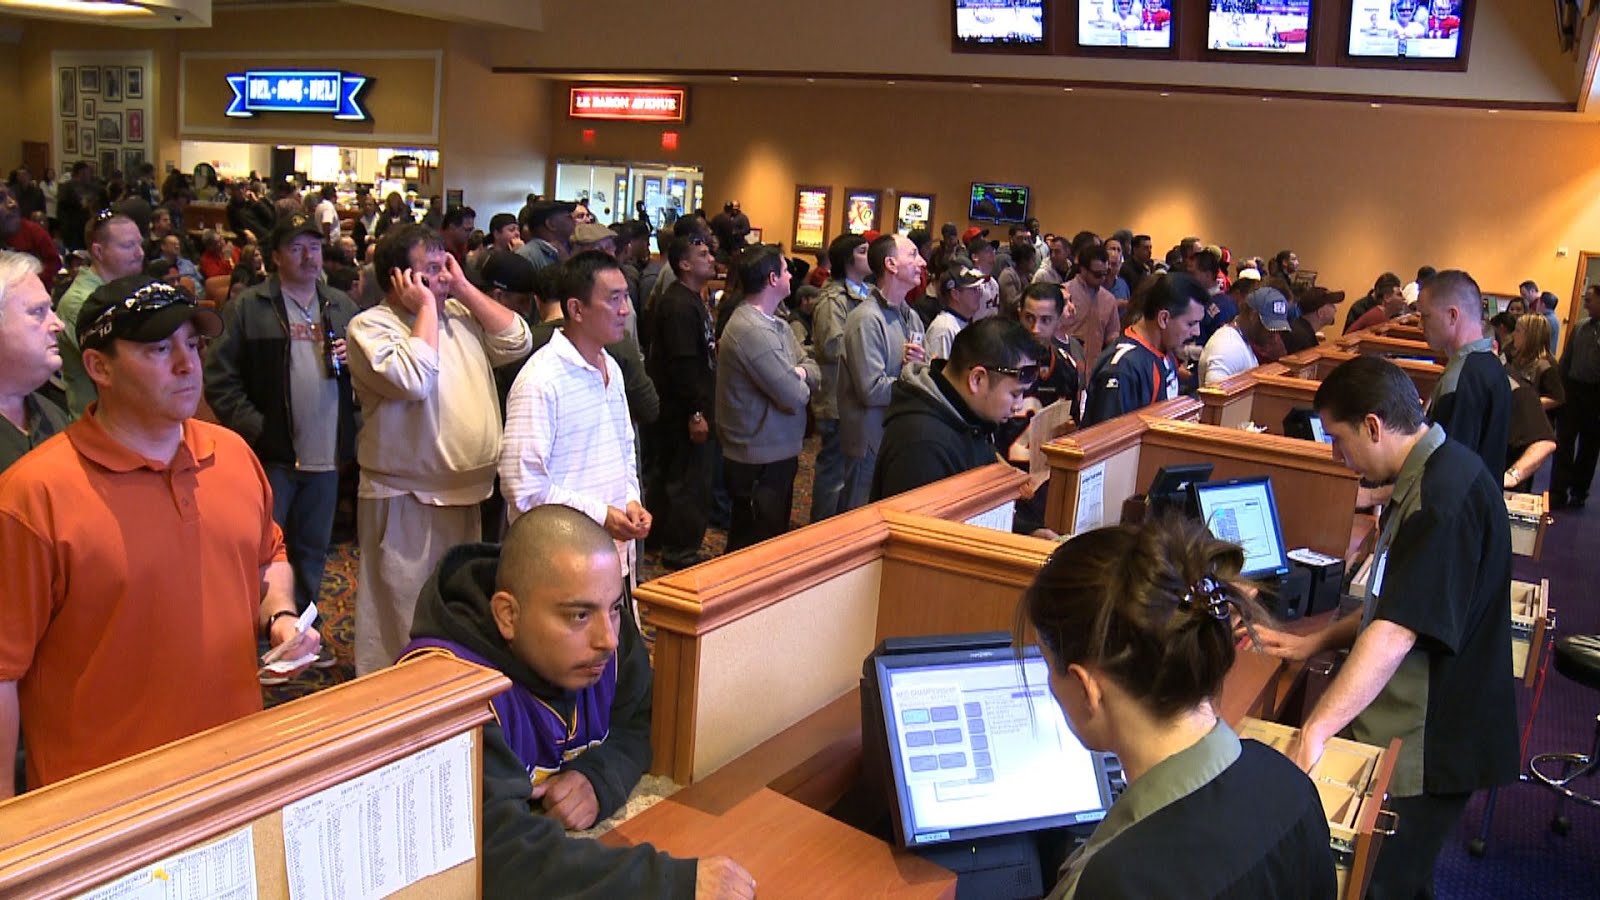 South Point Sports Book